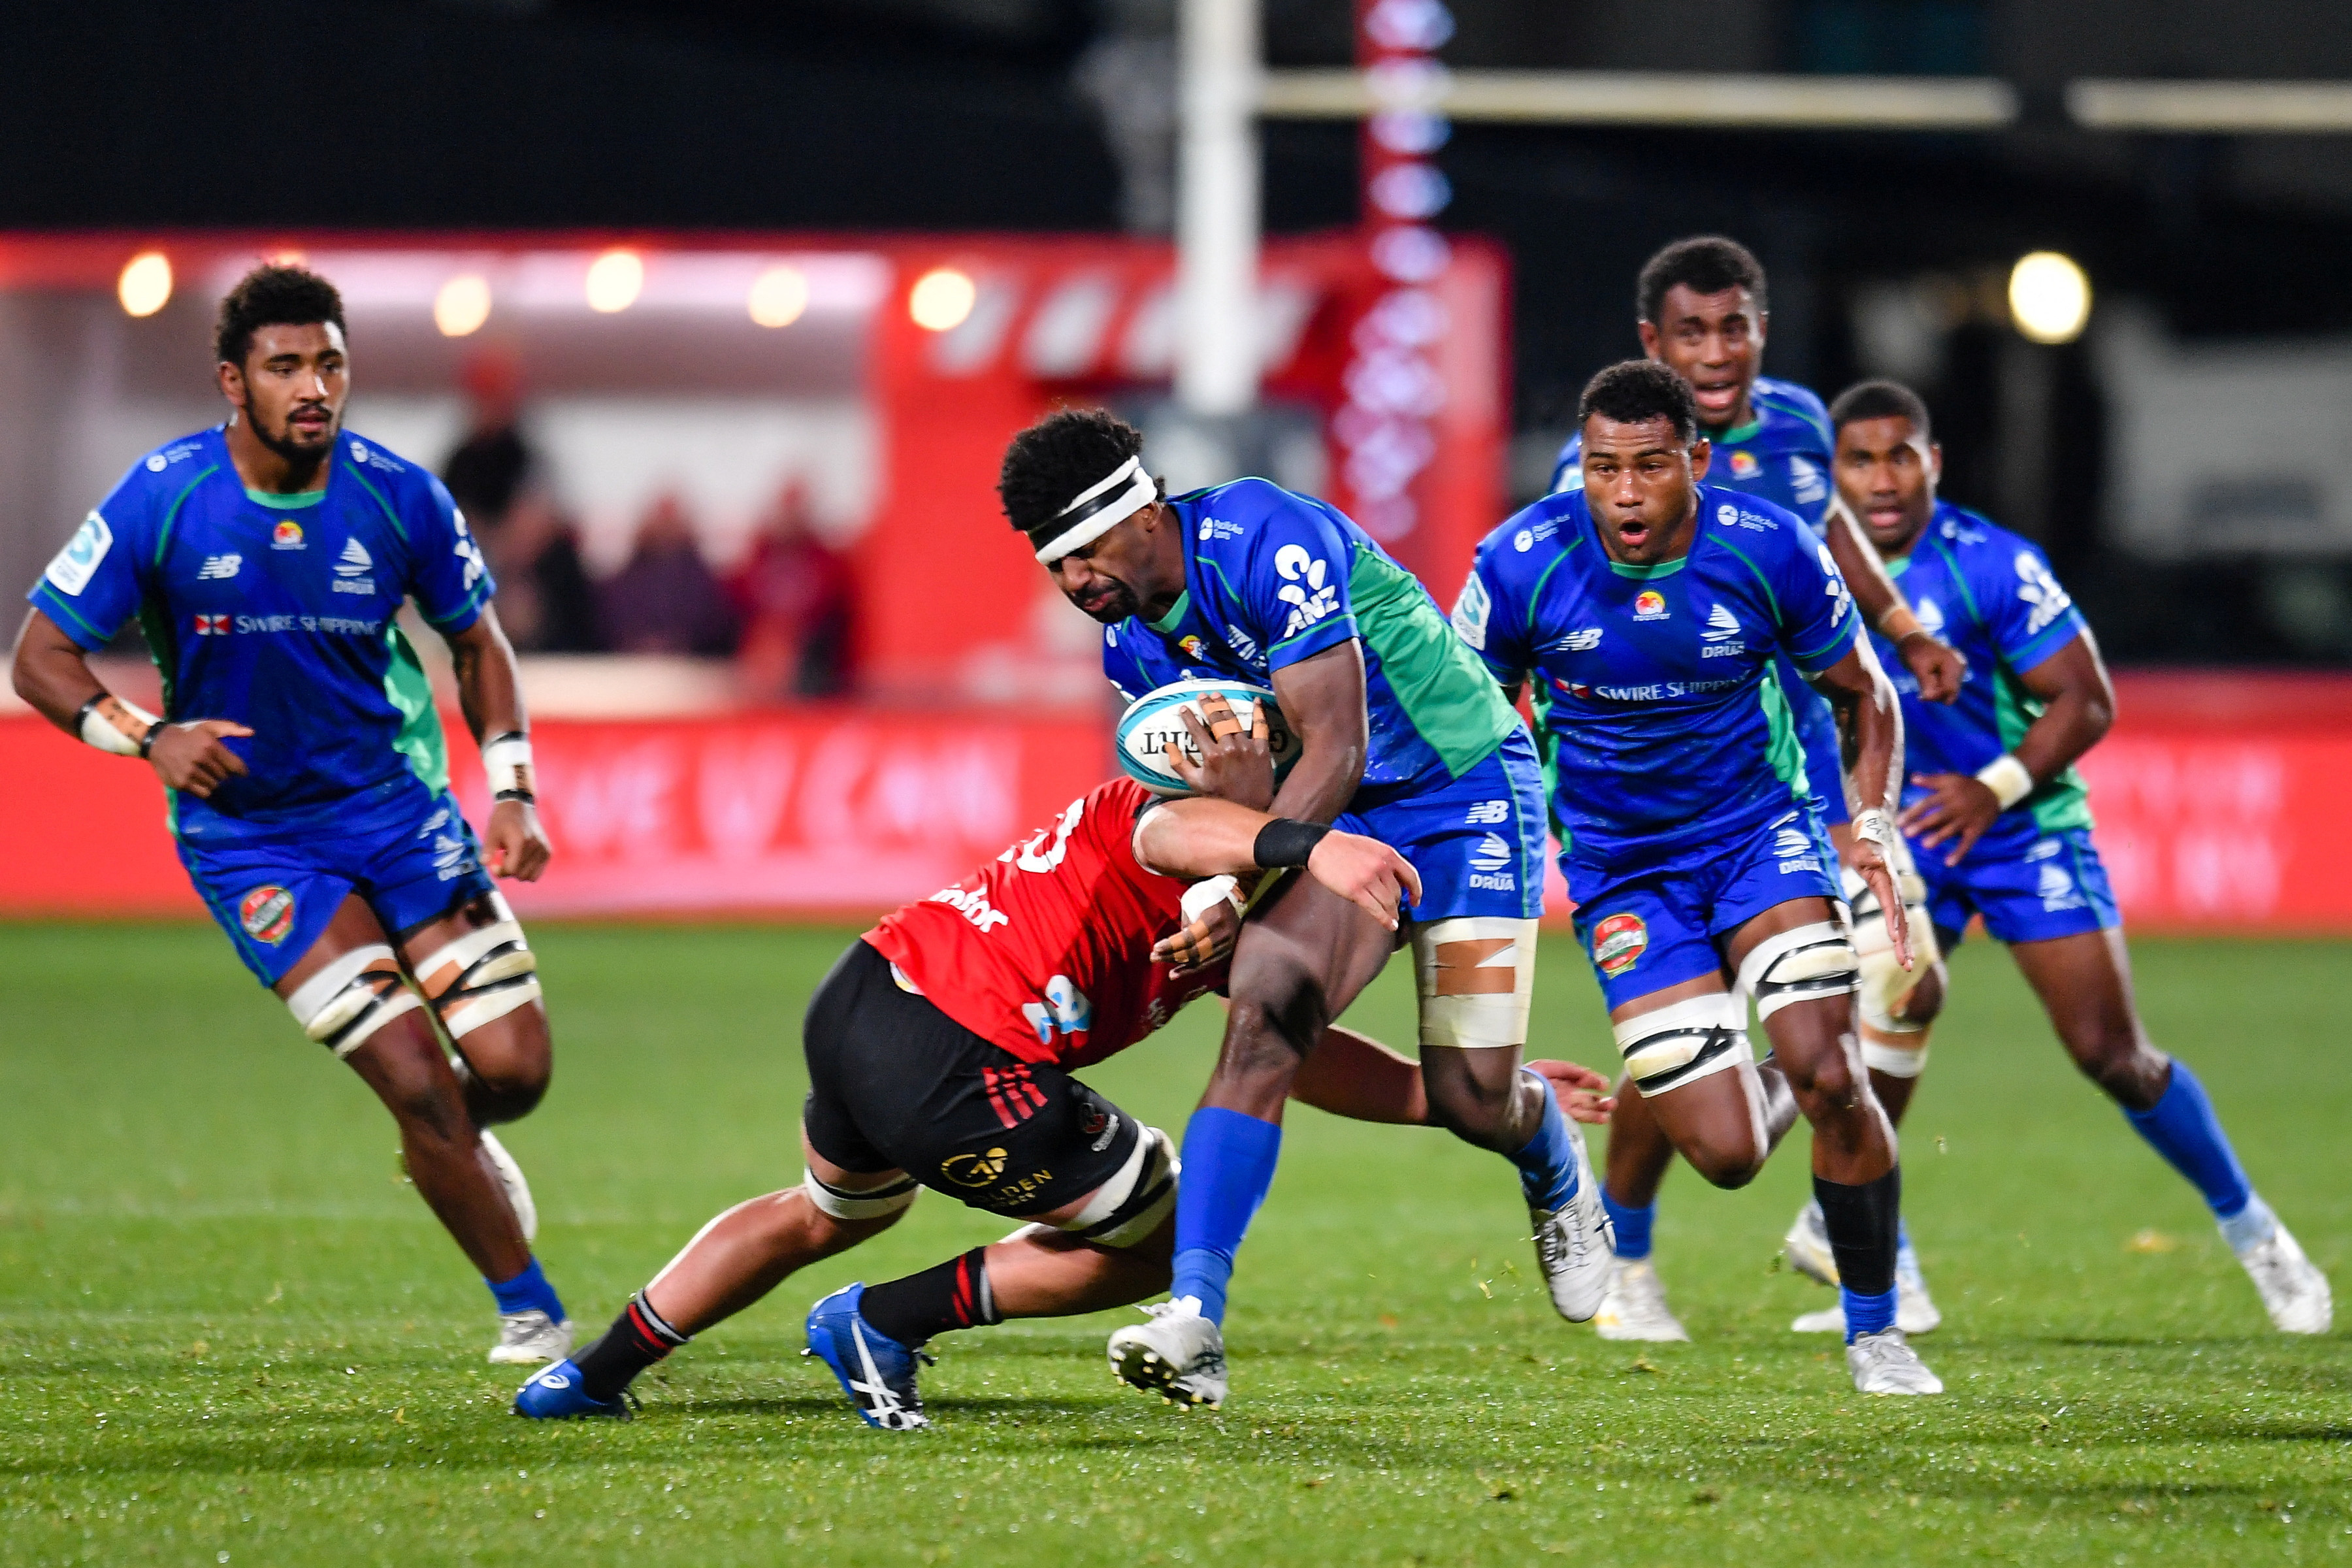 Fijian Drua to test injury-hit Crusaders with physical game Byrne Reuters